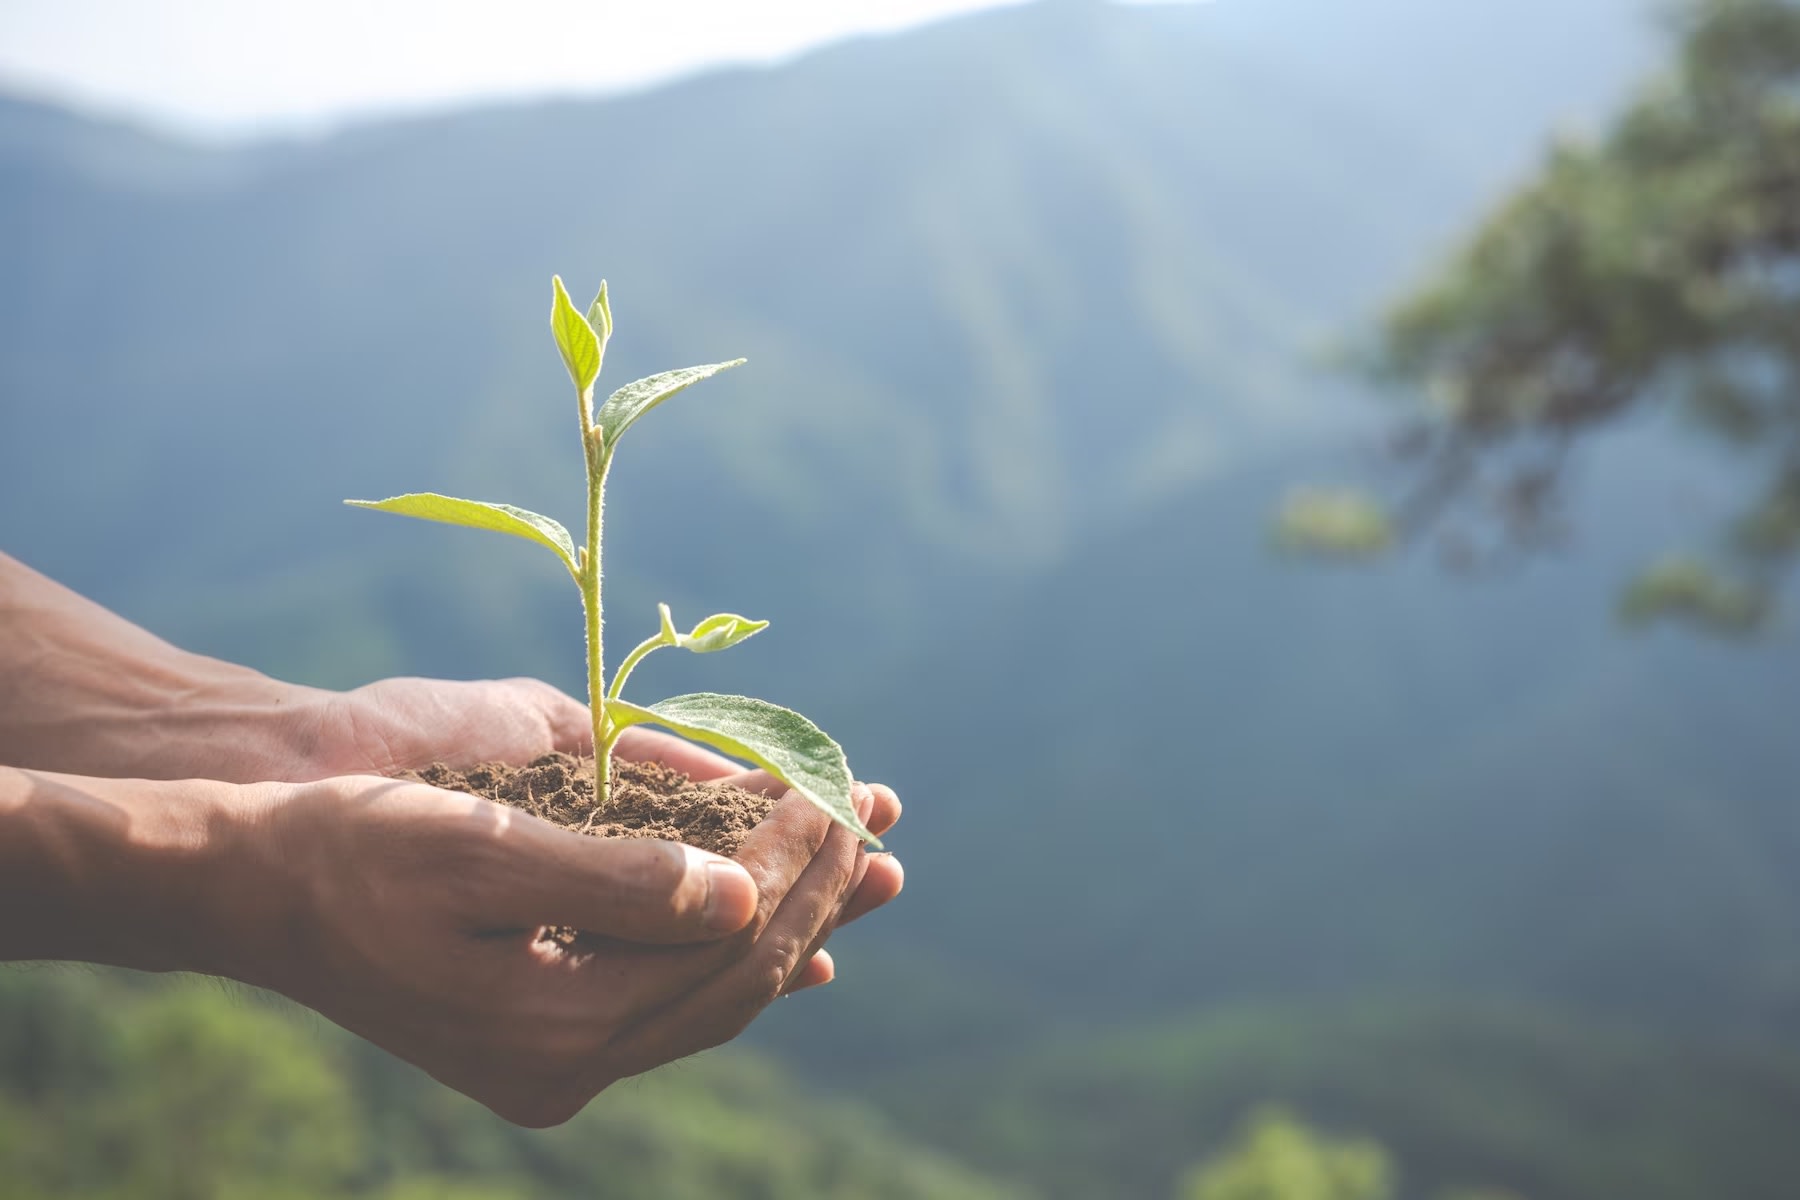 Image of hands cupping solid and a young plant shoot, with mountains in background